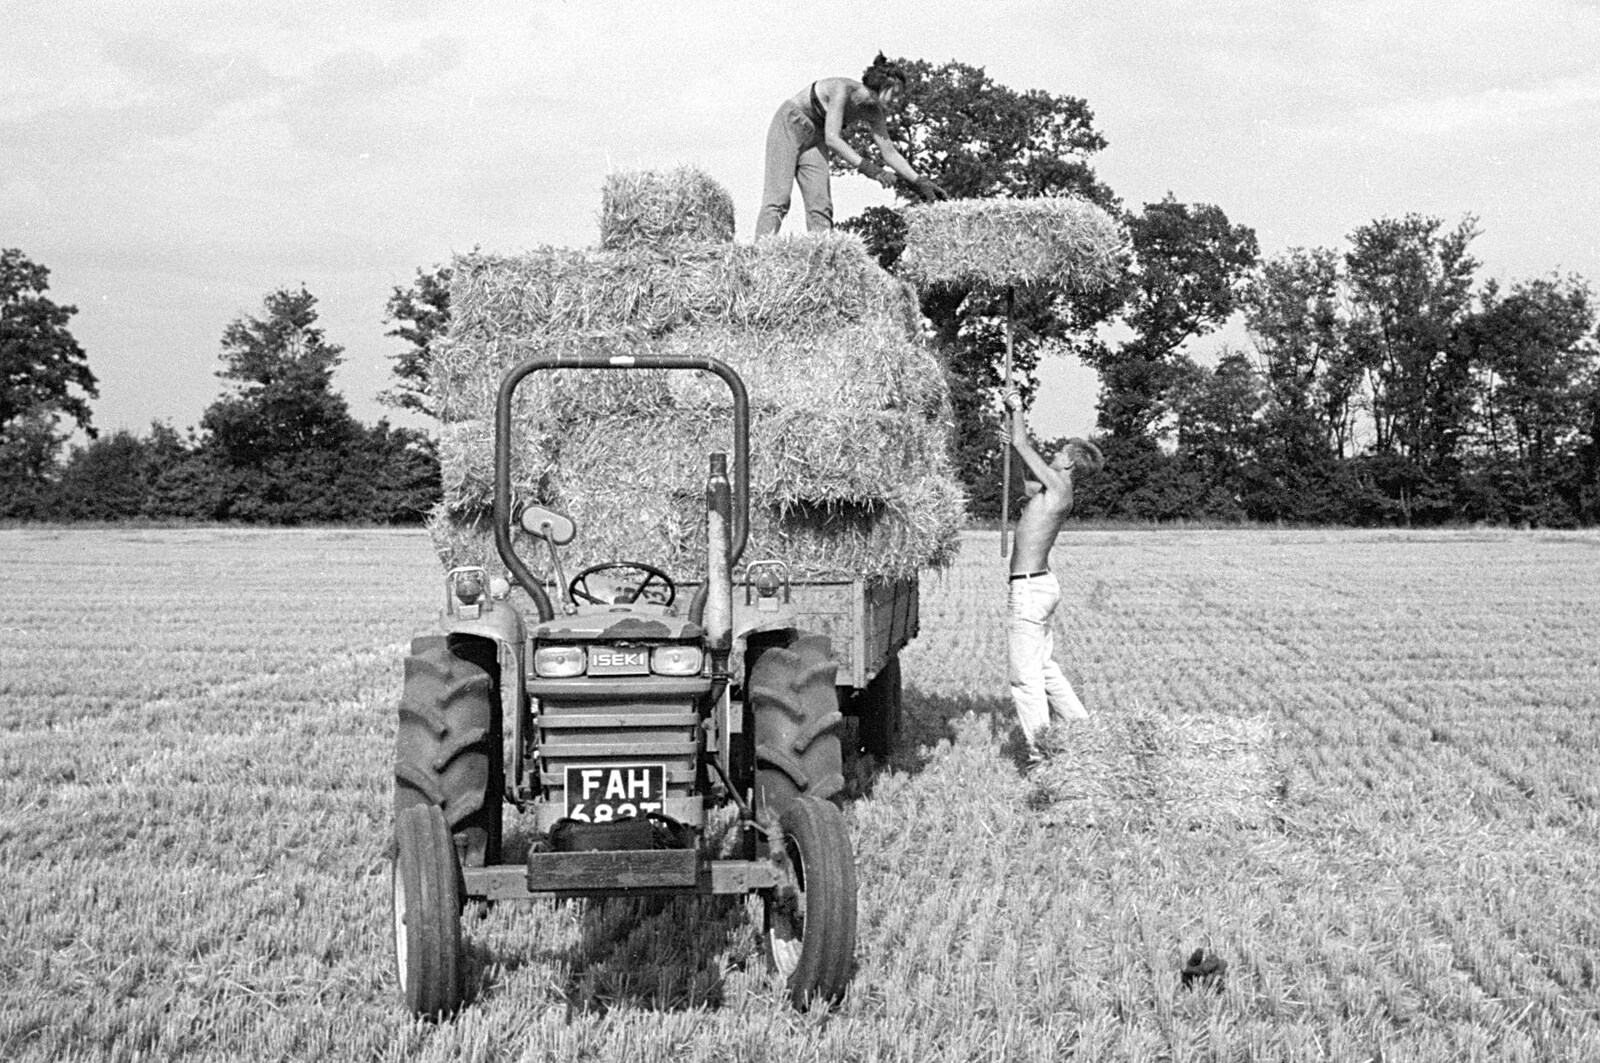 Nosher lifts a bale on a pitchfork from Working on the Harvest, Tibenham, Norfolk - 11th August 1992